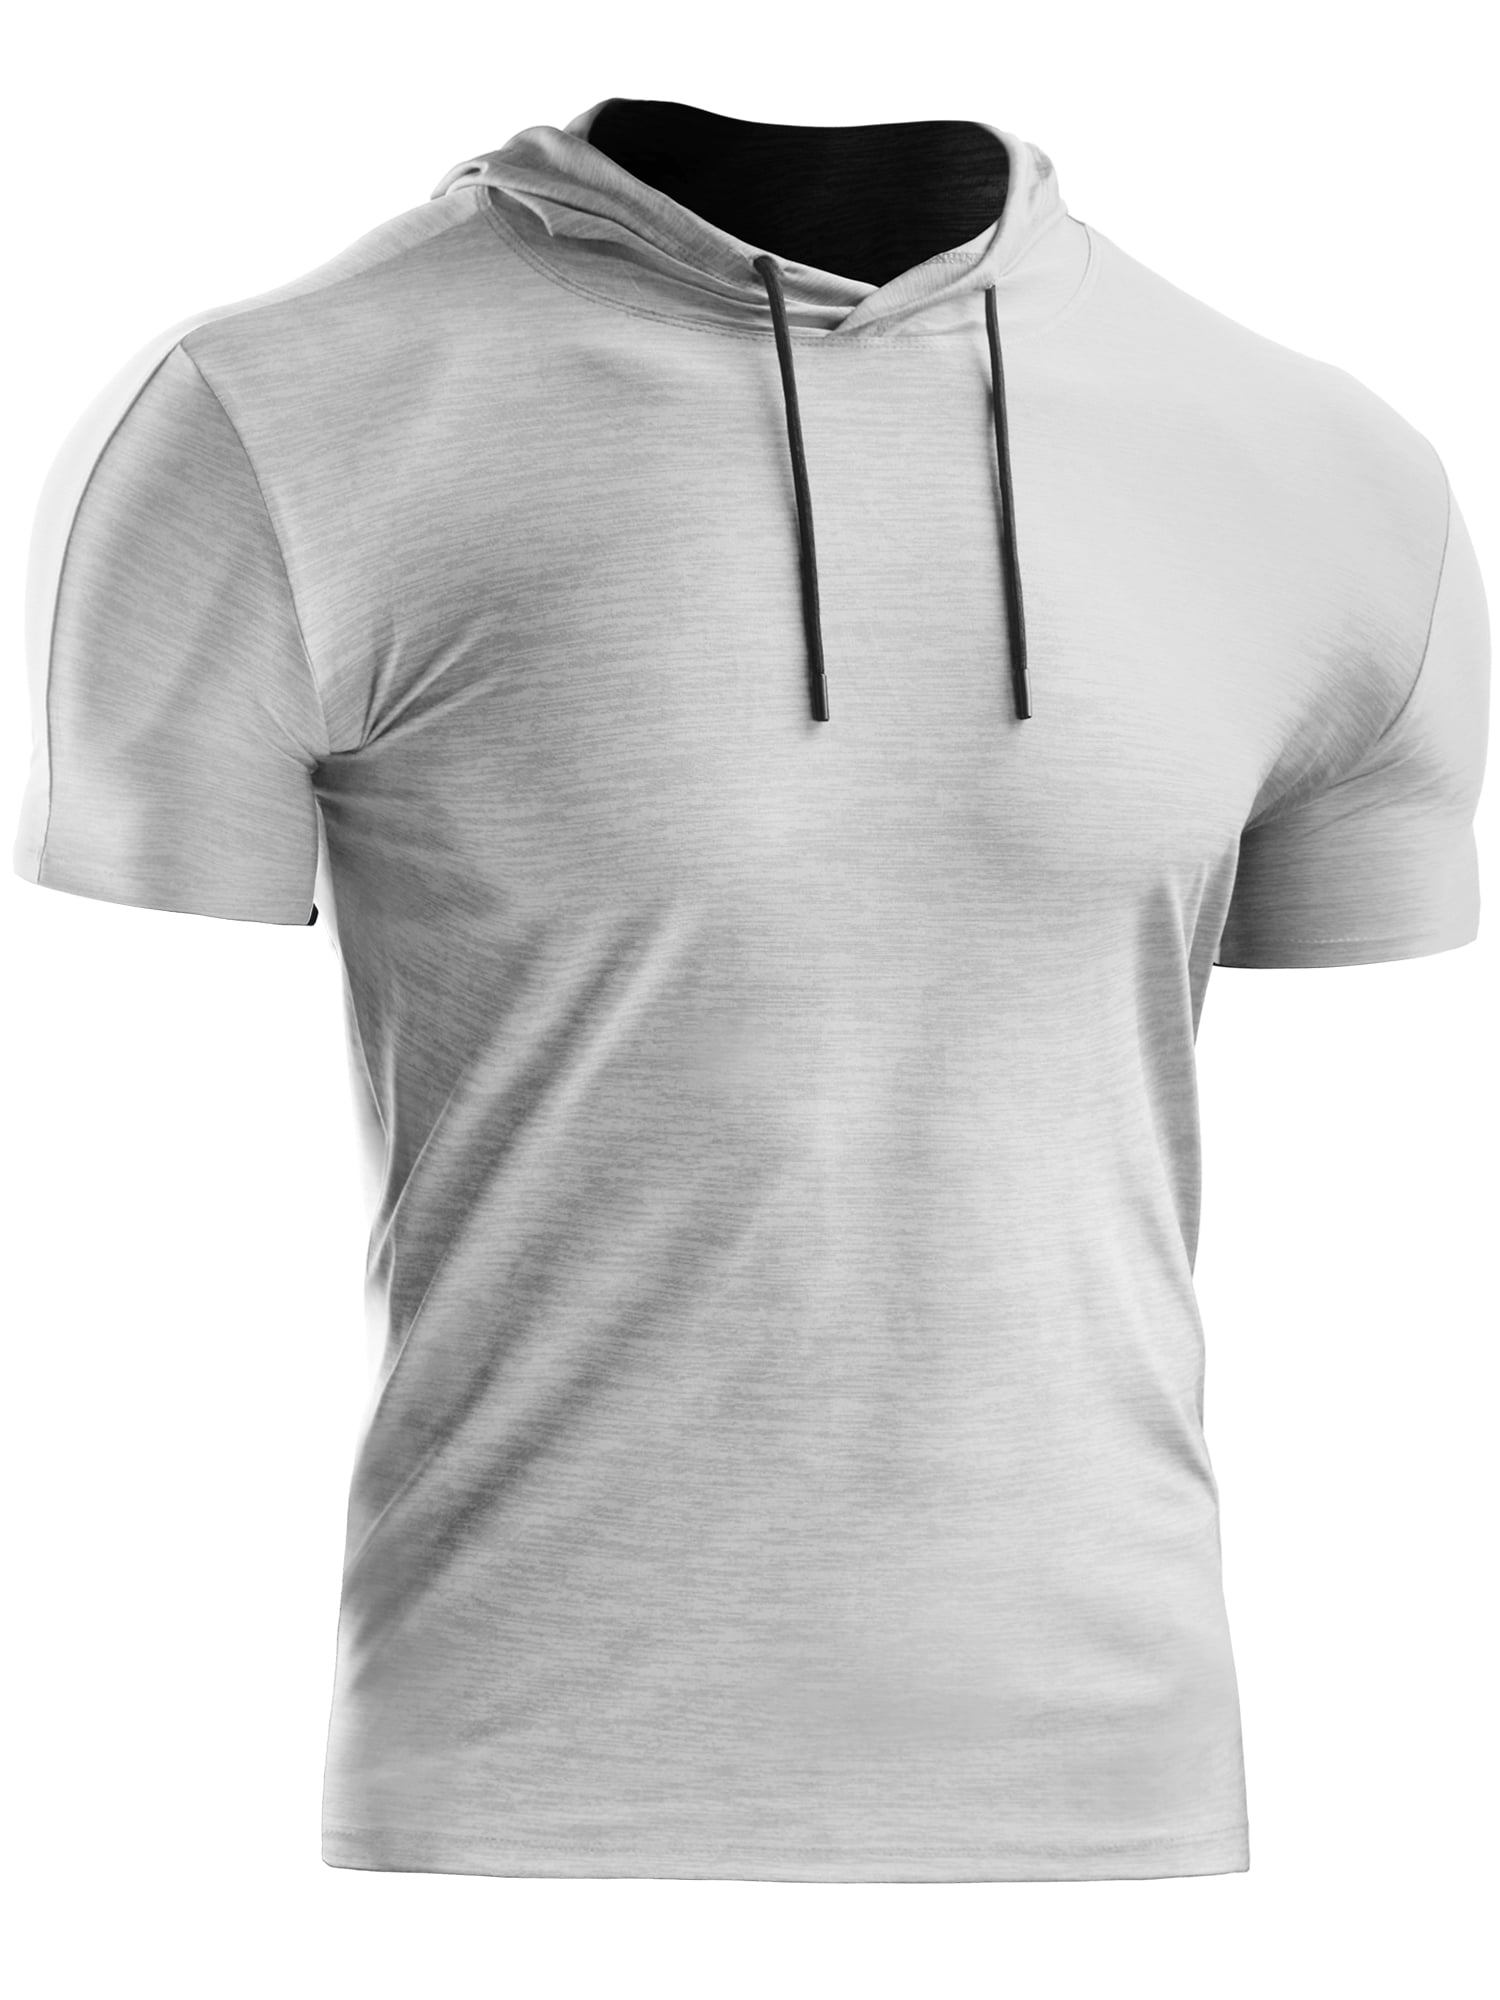 Burband Hipster Hip Hop Mens Gym Hoodie Pullover Casual Short Sleeve Muscle Cut Off Workout T-Shirt Tops